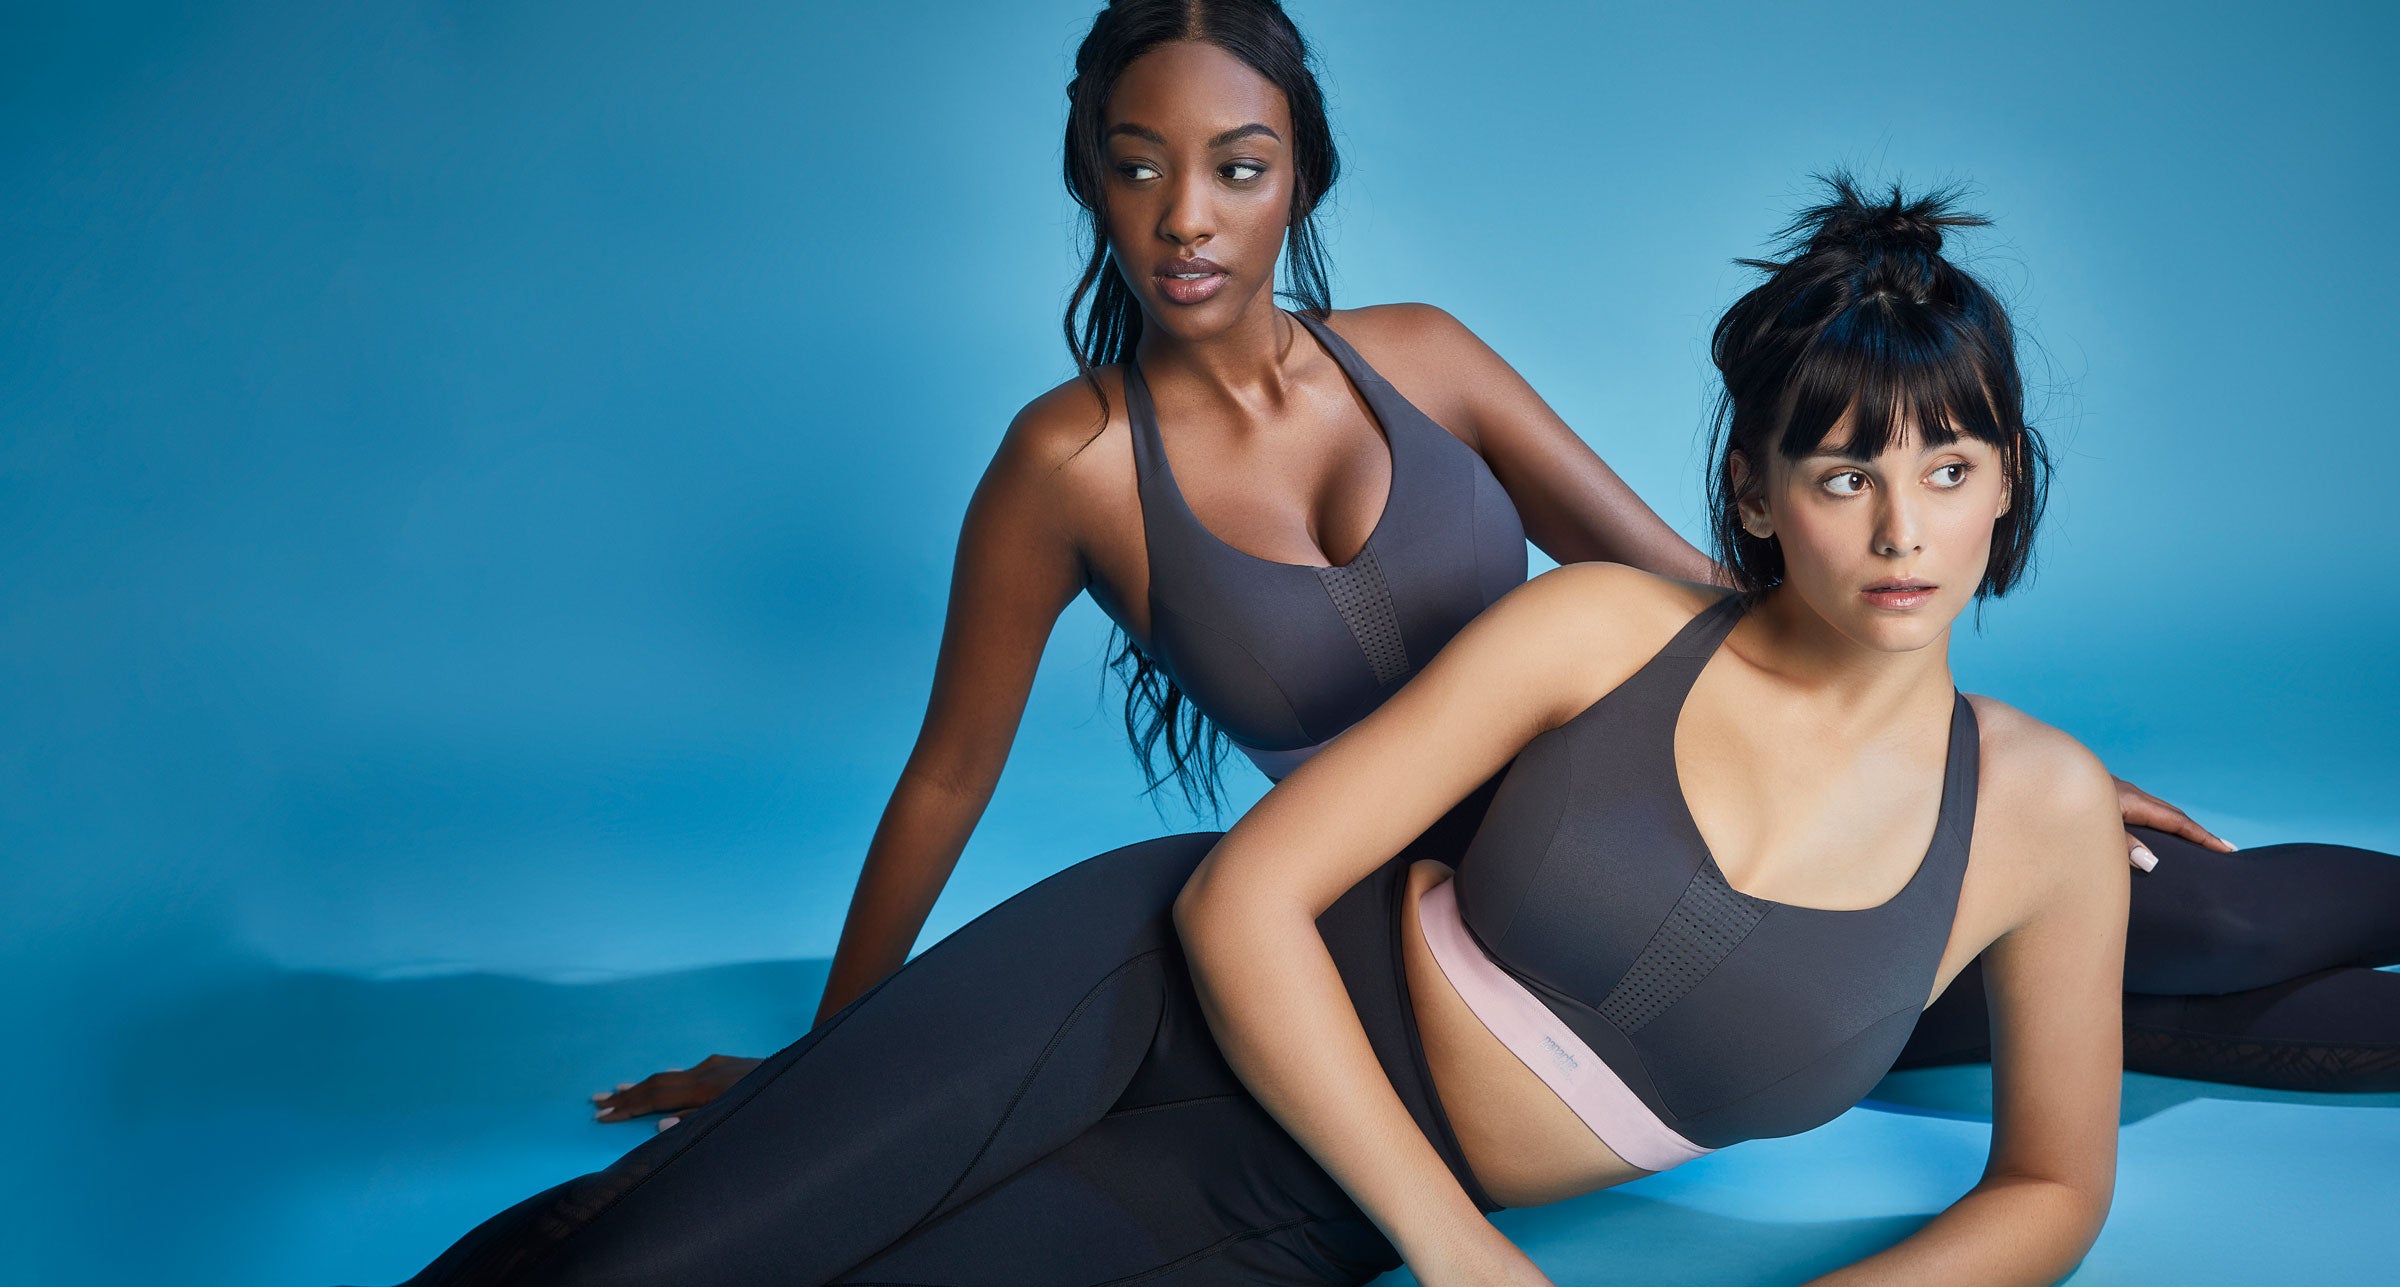 sports bra fittings with two women